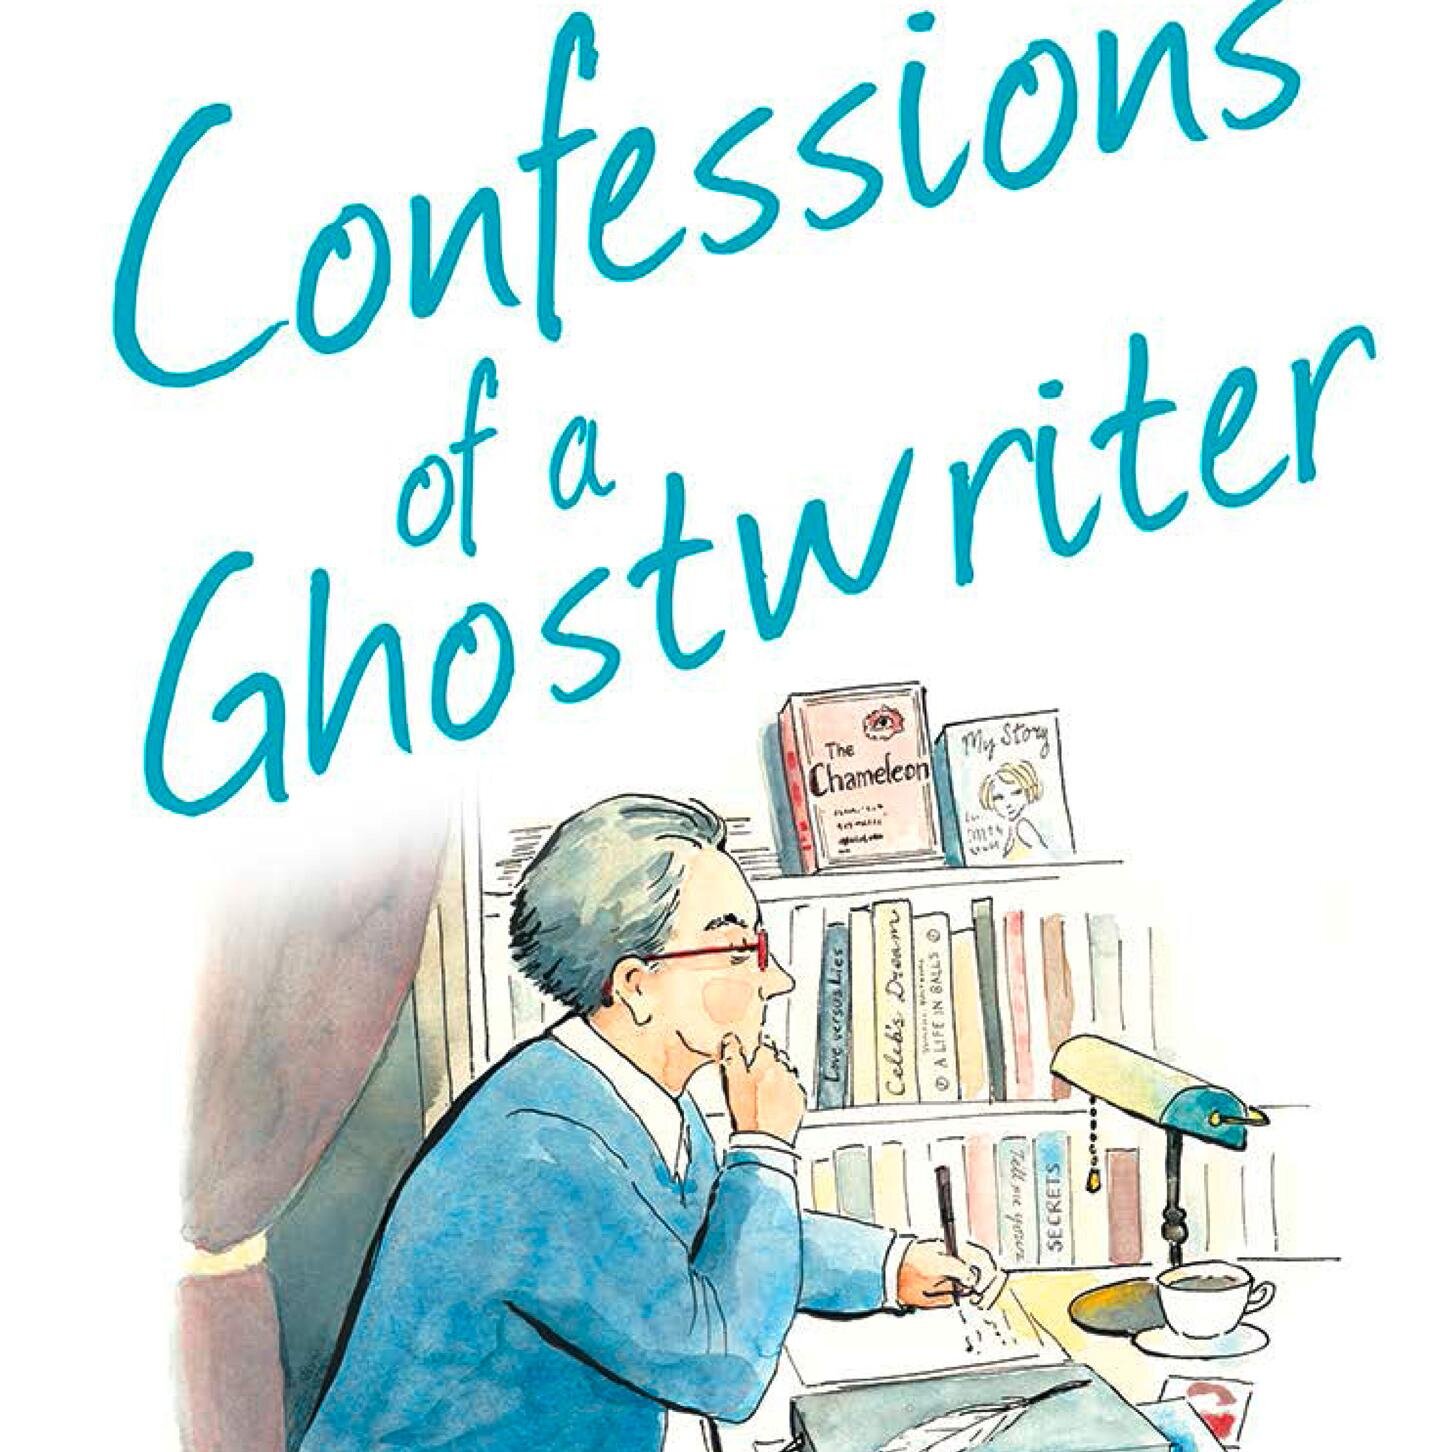 Ghostwriter and author of 